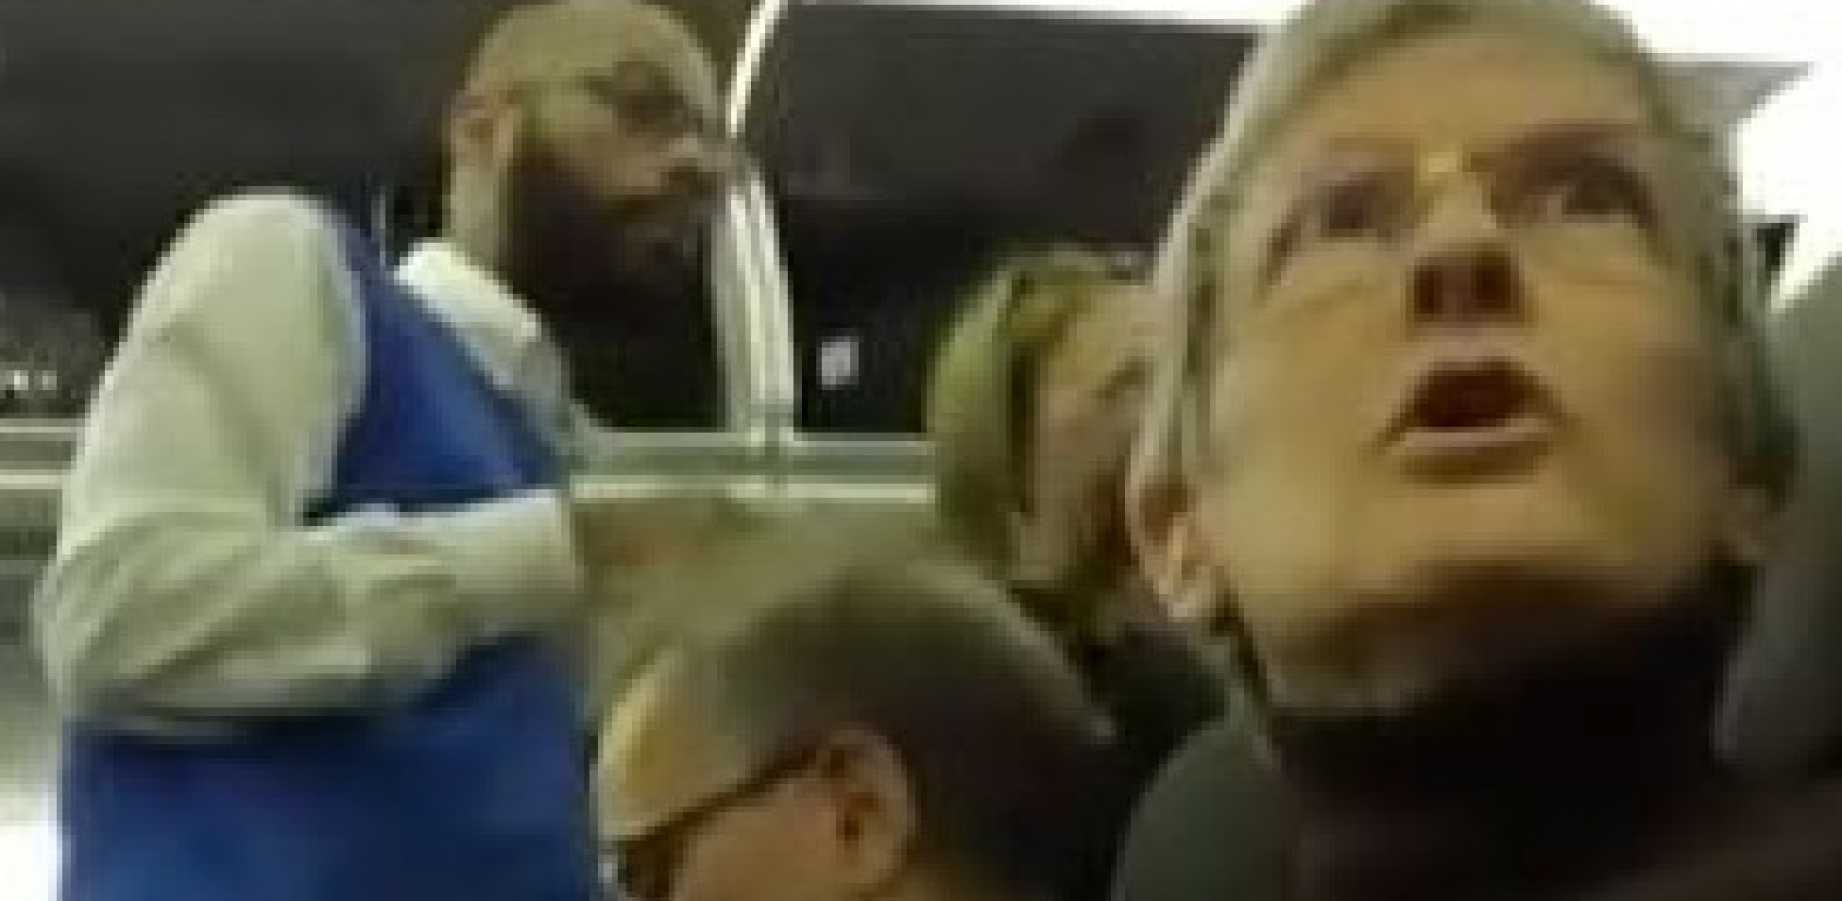 Woman Thrown Off Plane For Confronting Trump Supporter: Passengers Shout ‘USA!’